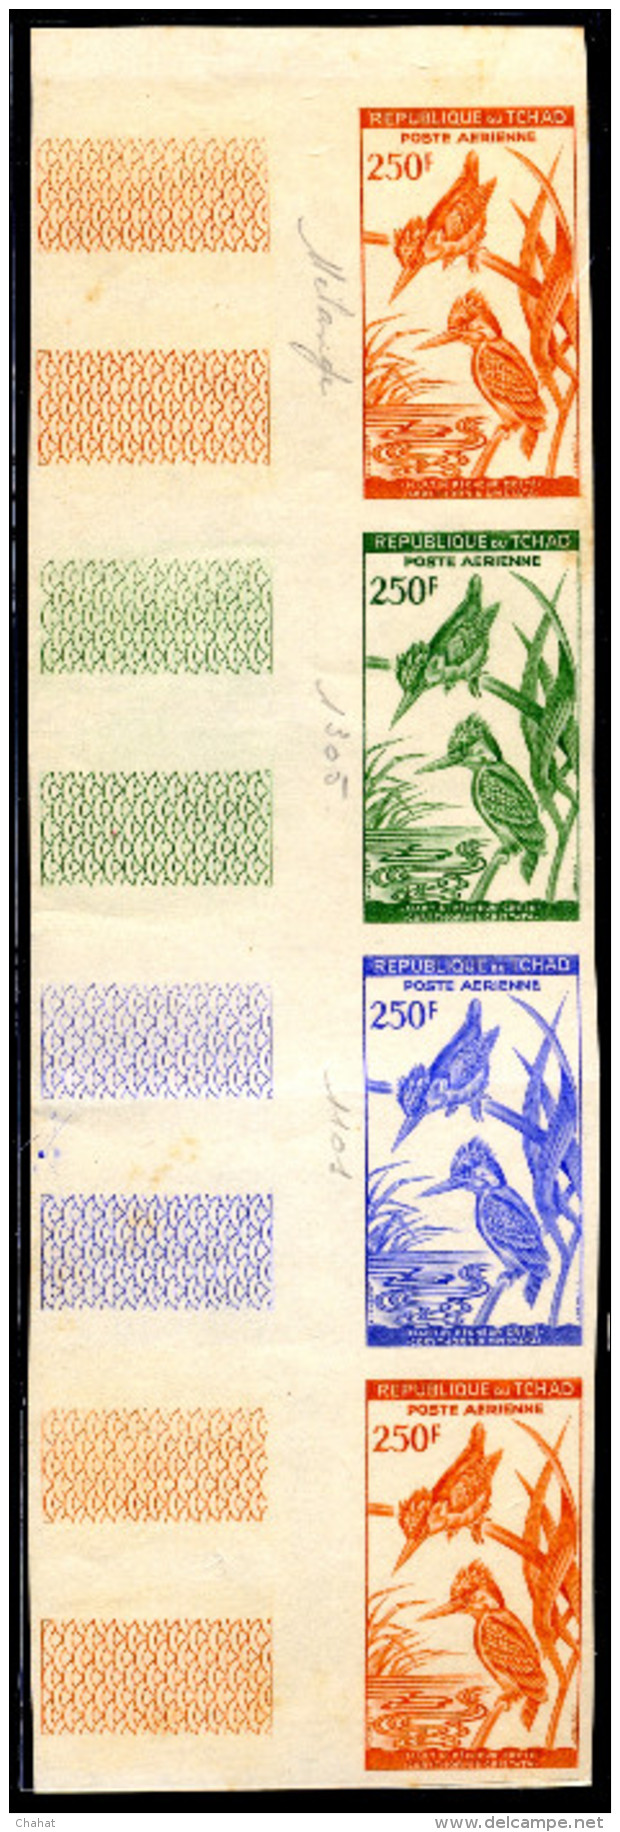 BIRDS-MALACHITE KINGFISHER-IMPERF COLOR TRIALS-STRIP OF 4 WITH JEWELS ON MARGINS-CHAD-1963-SCARCE-D2-11 - Specht- & Bartvögel